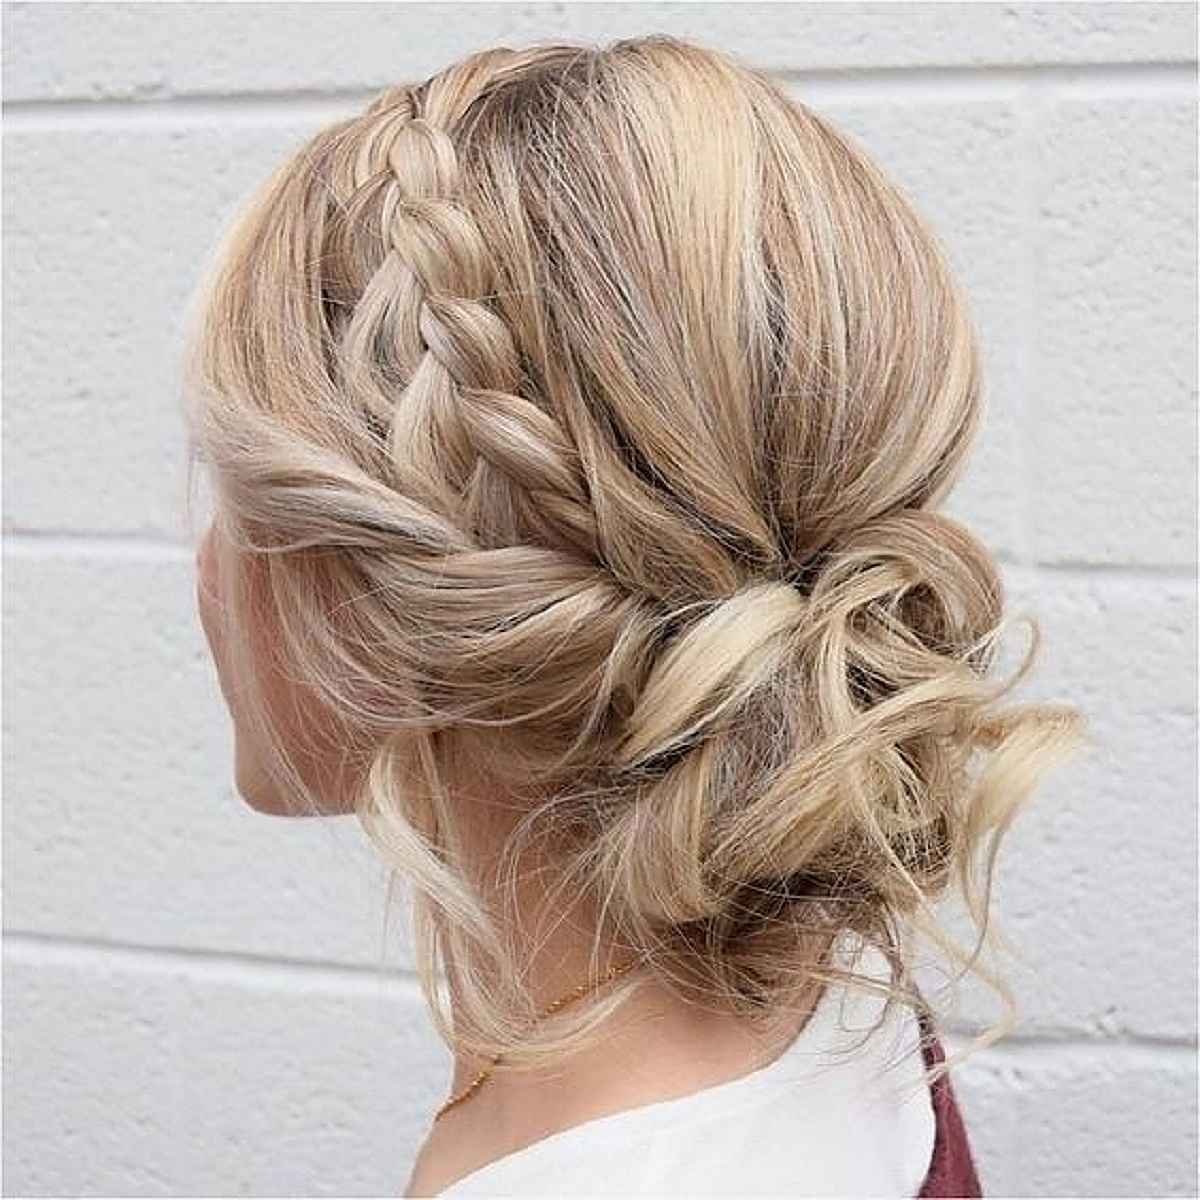 Messy Bun with an Accent Side Braid